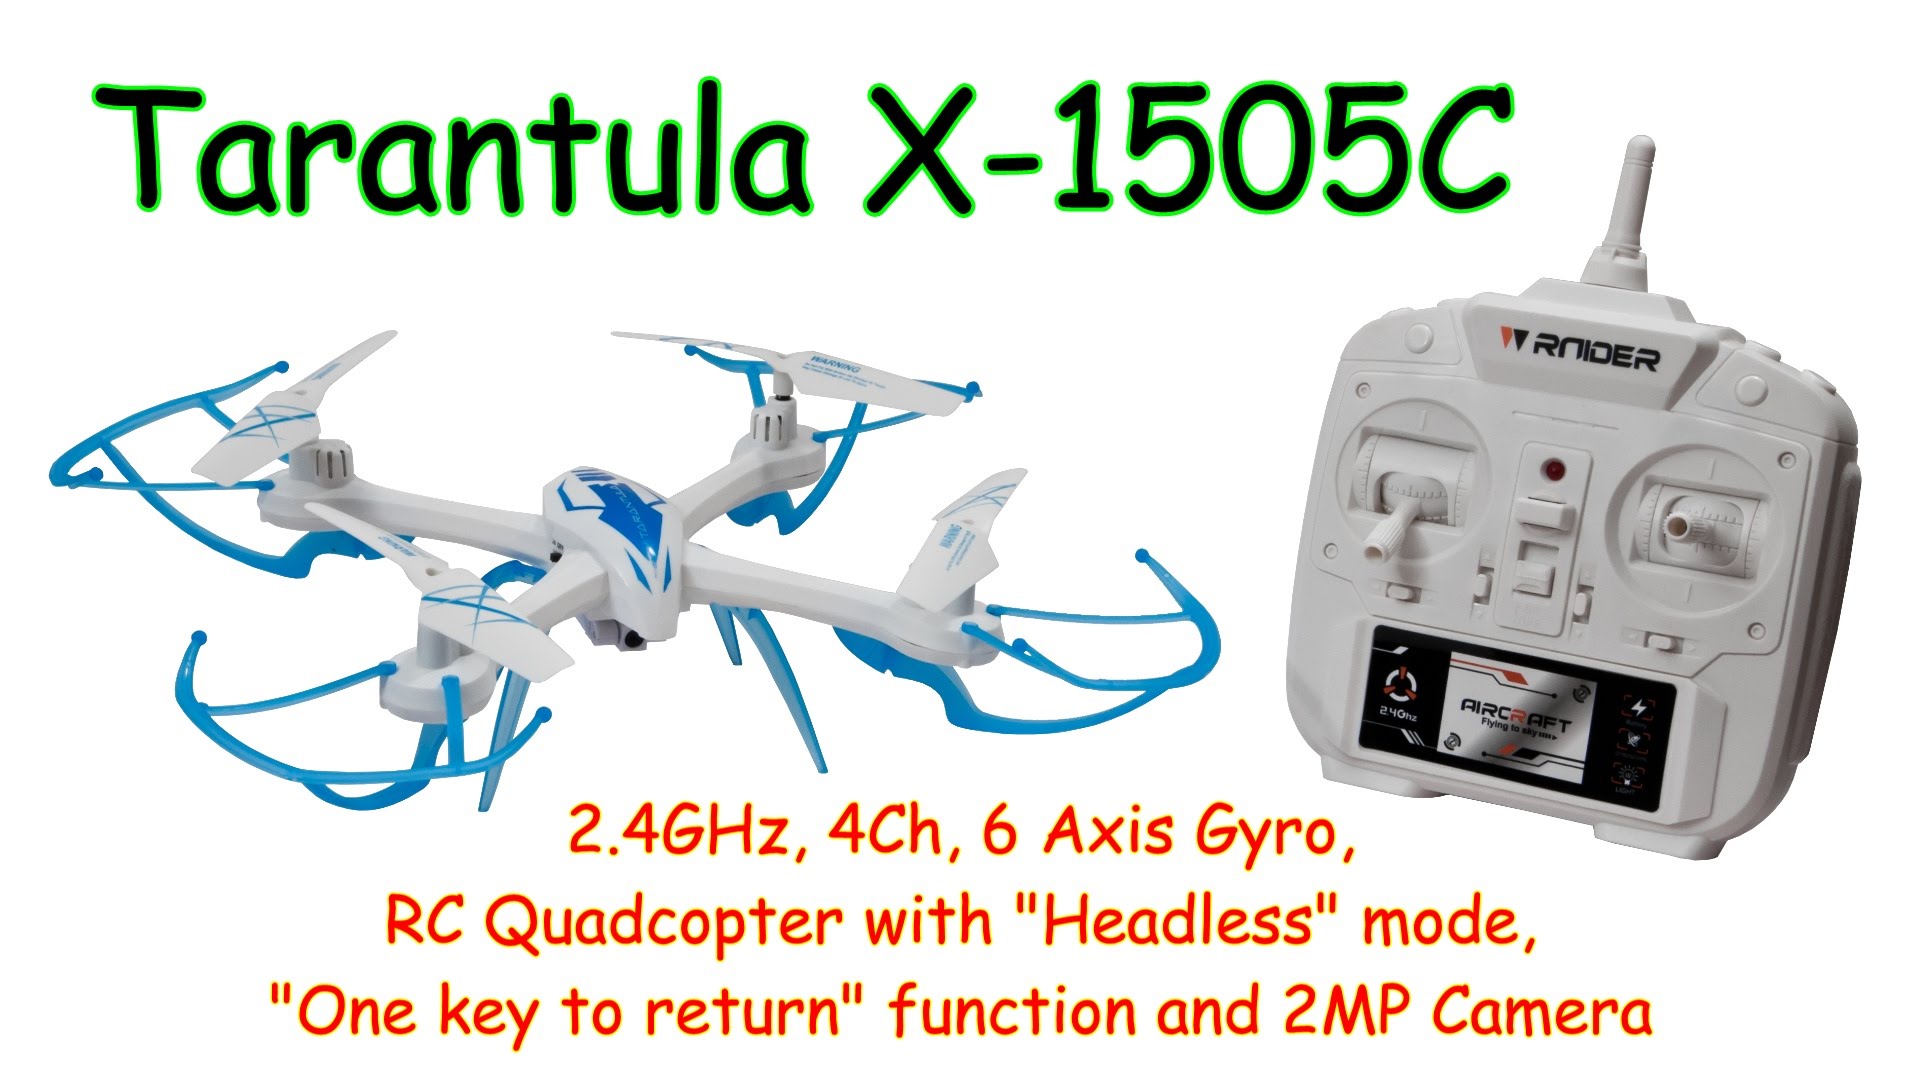 Tarantula X-1505C 2.4GHz, 4Ch, 6 Axis Gyro, RC Quadcopter with Headless mode and 2MP Camera (RTF)